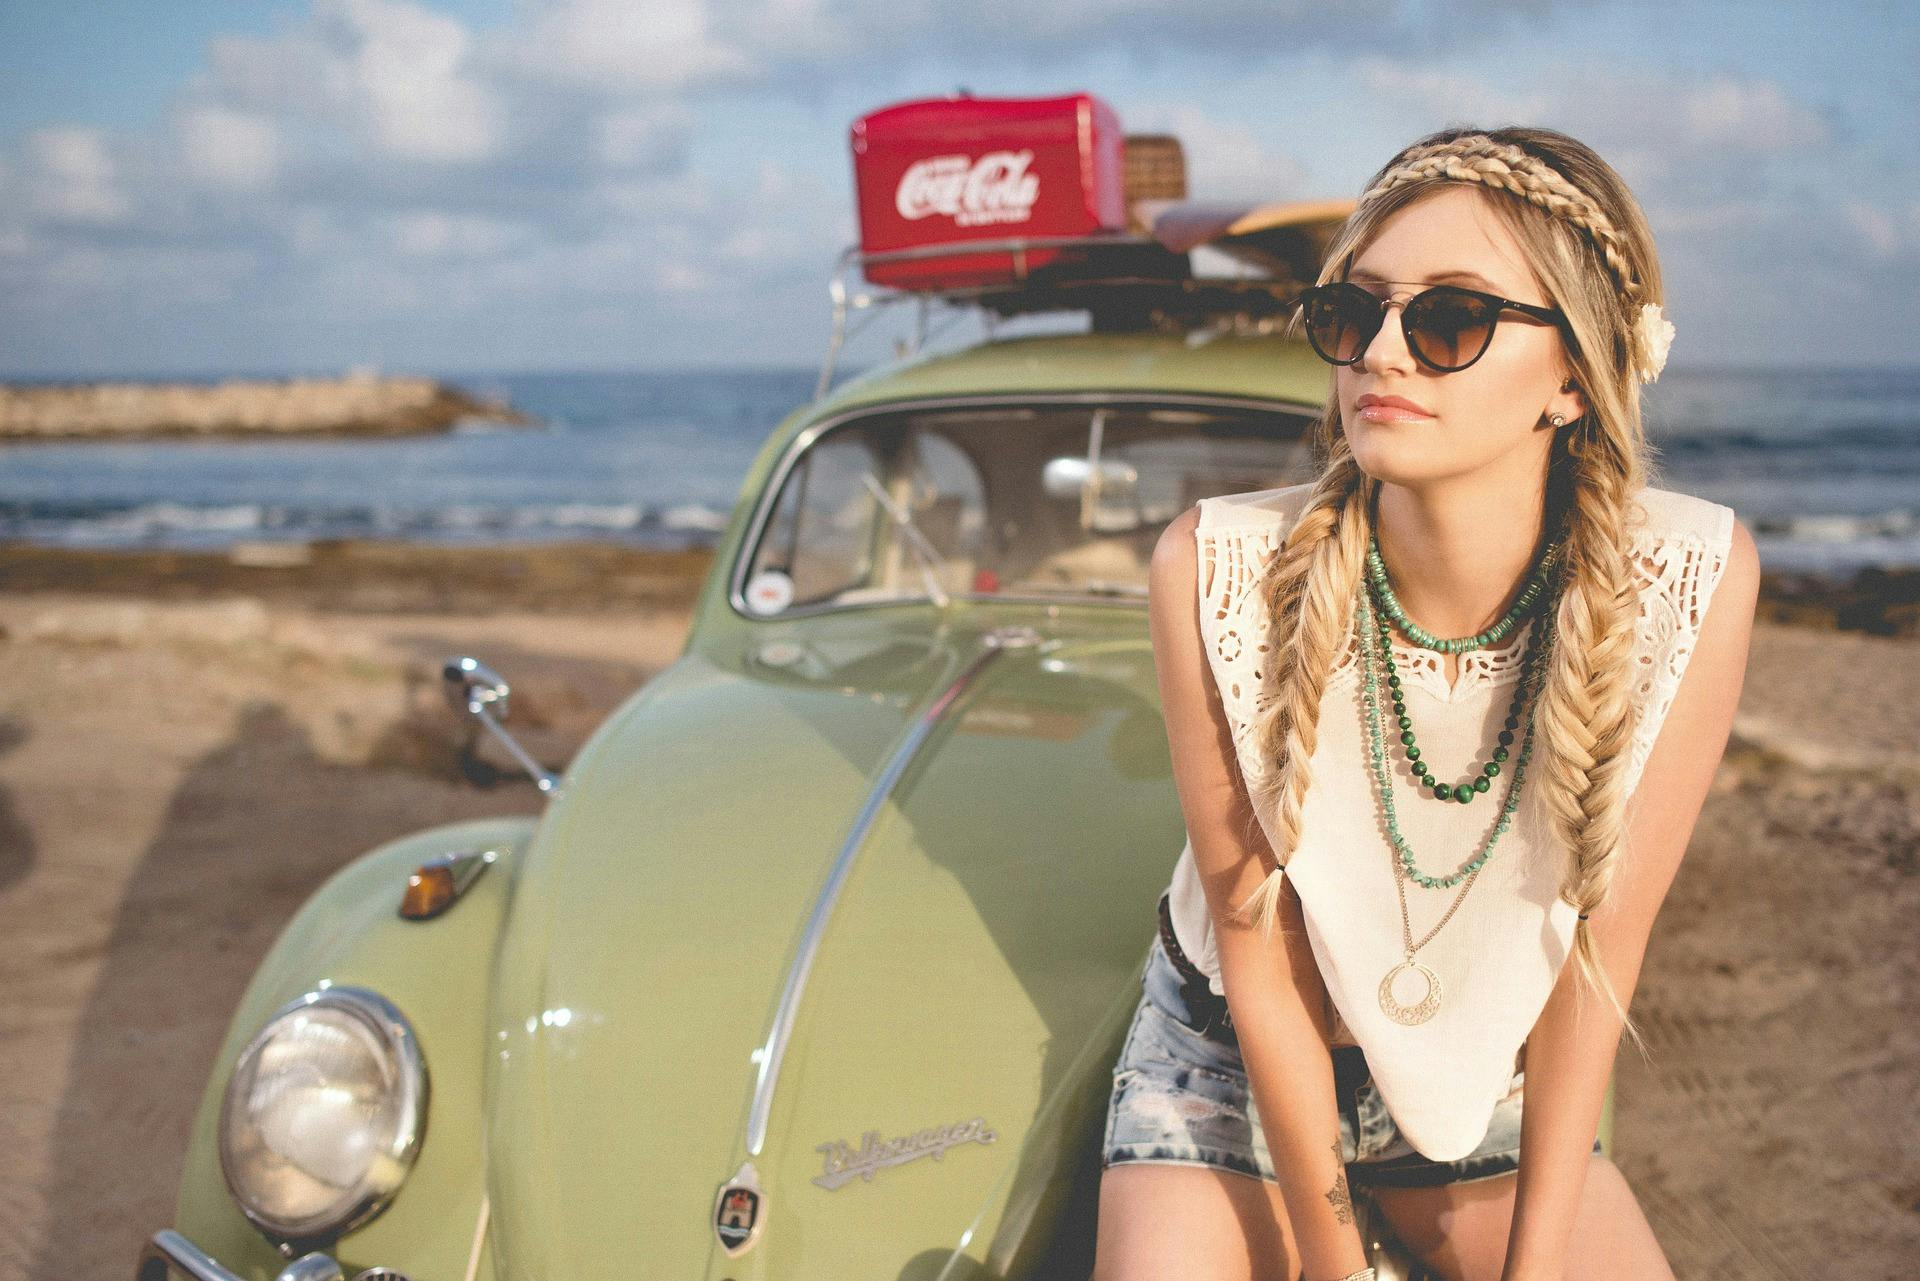 woman with sunglasses sitting on hood of vintage VW Beetle by the sea